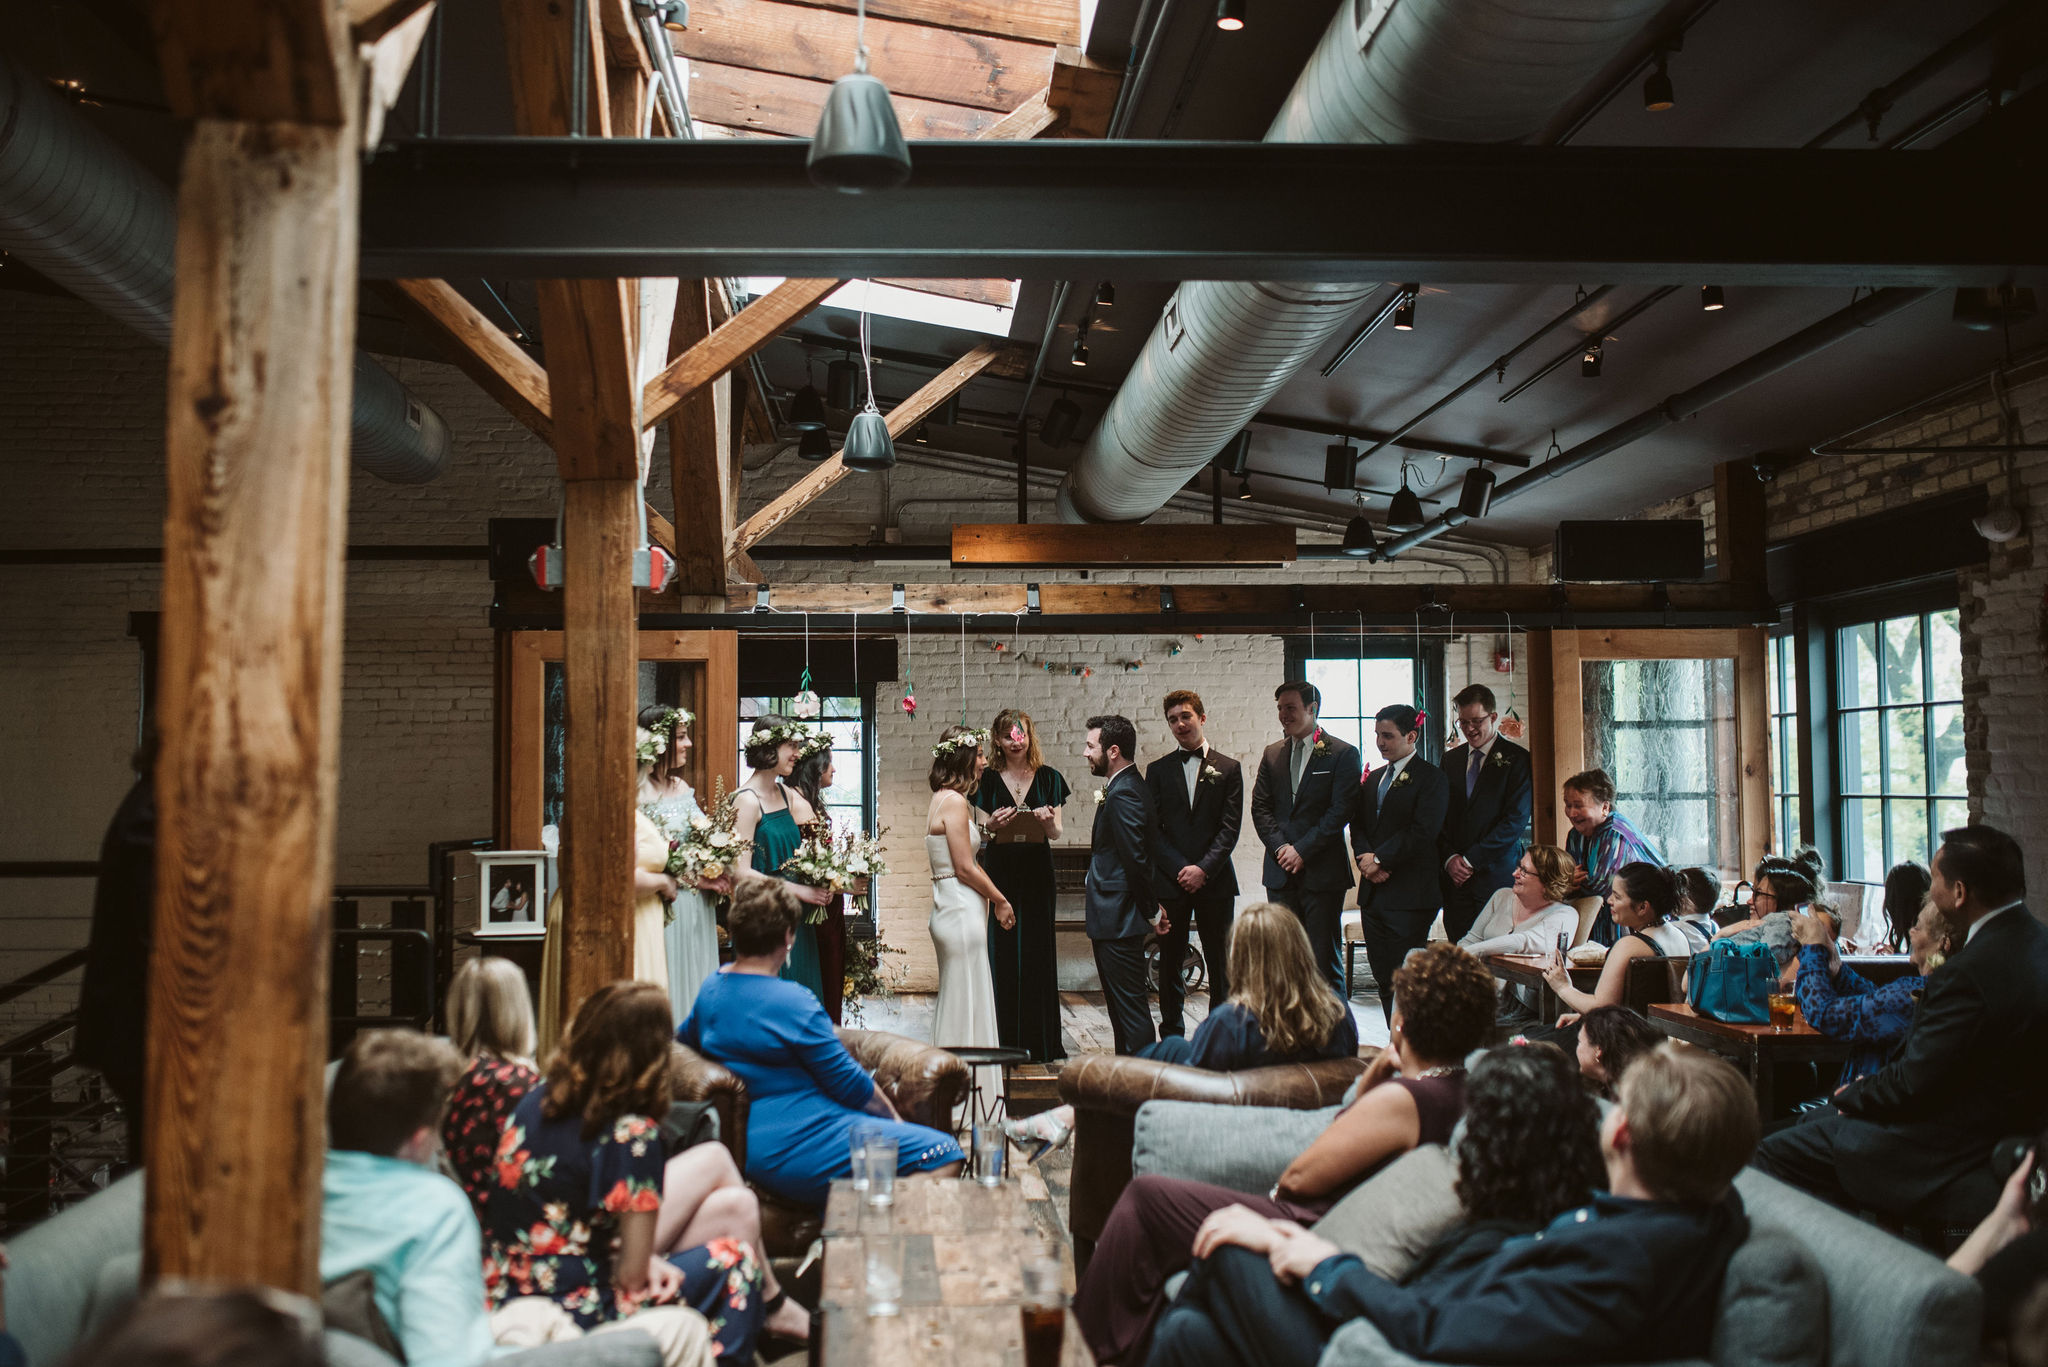  Washington DC, Baltimore Wedding Photographer, Alexandria, Old Town, Jewel Tone, Romantic, Modern, Virtue Feed &amp; Grain, Whole Scene of Guests Gathered During Ceremony 